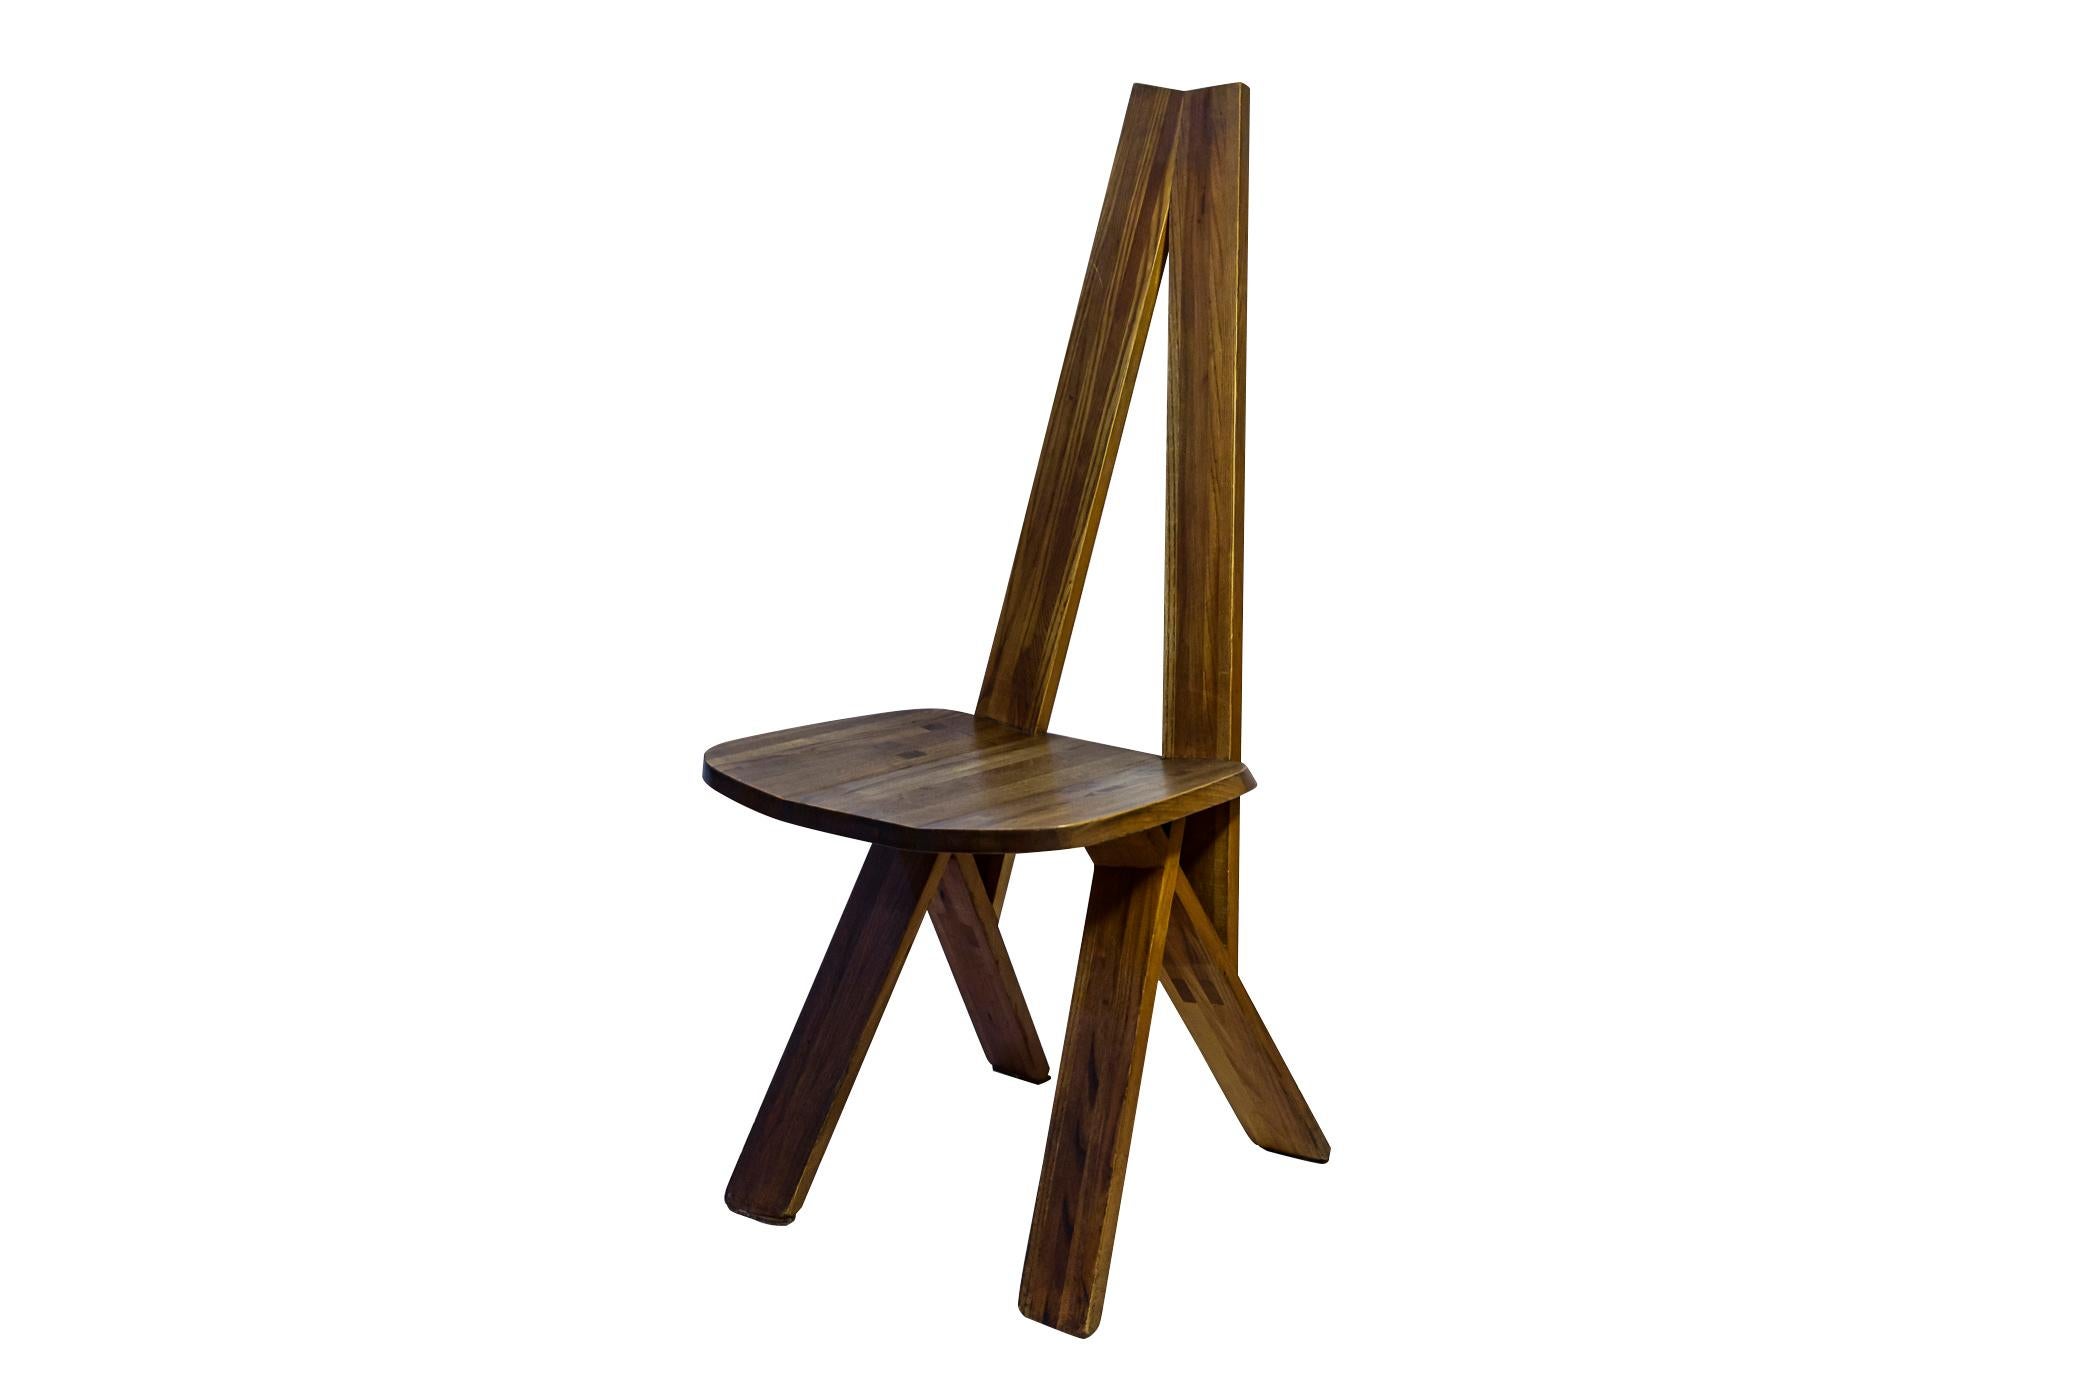 Pierre Chapo (1927-1987), Set of four chairs,
Model S45 dining chair,
Wood,
France, circa 1970.

Measures: Height 105 cm, width 43 cm, depth 51 cm, seat height 46 cm.

After studying in Paris interspersed with trips to the Scandinavian countries,